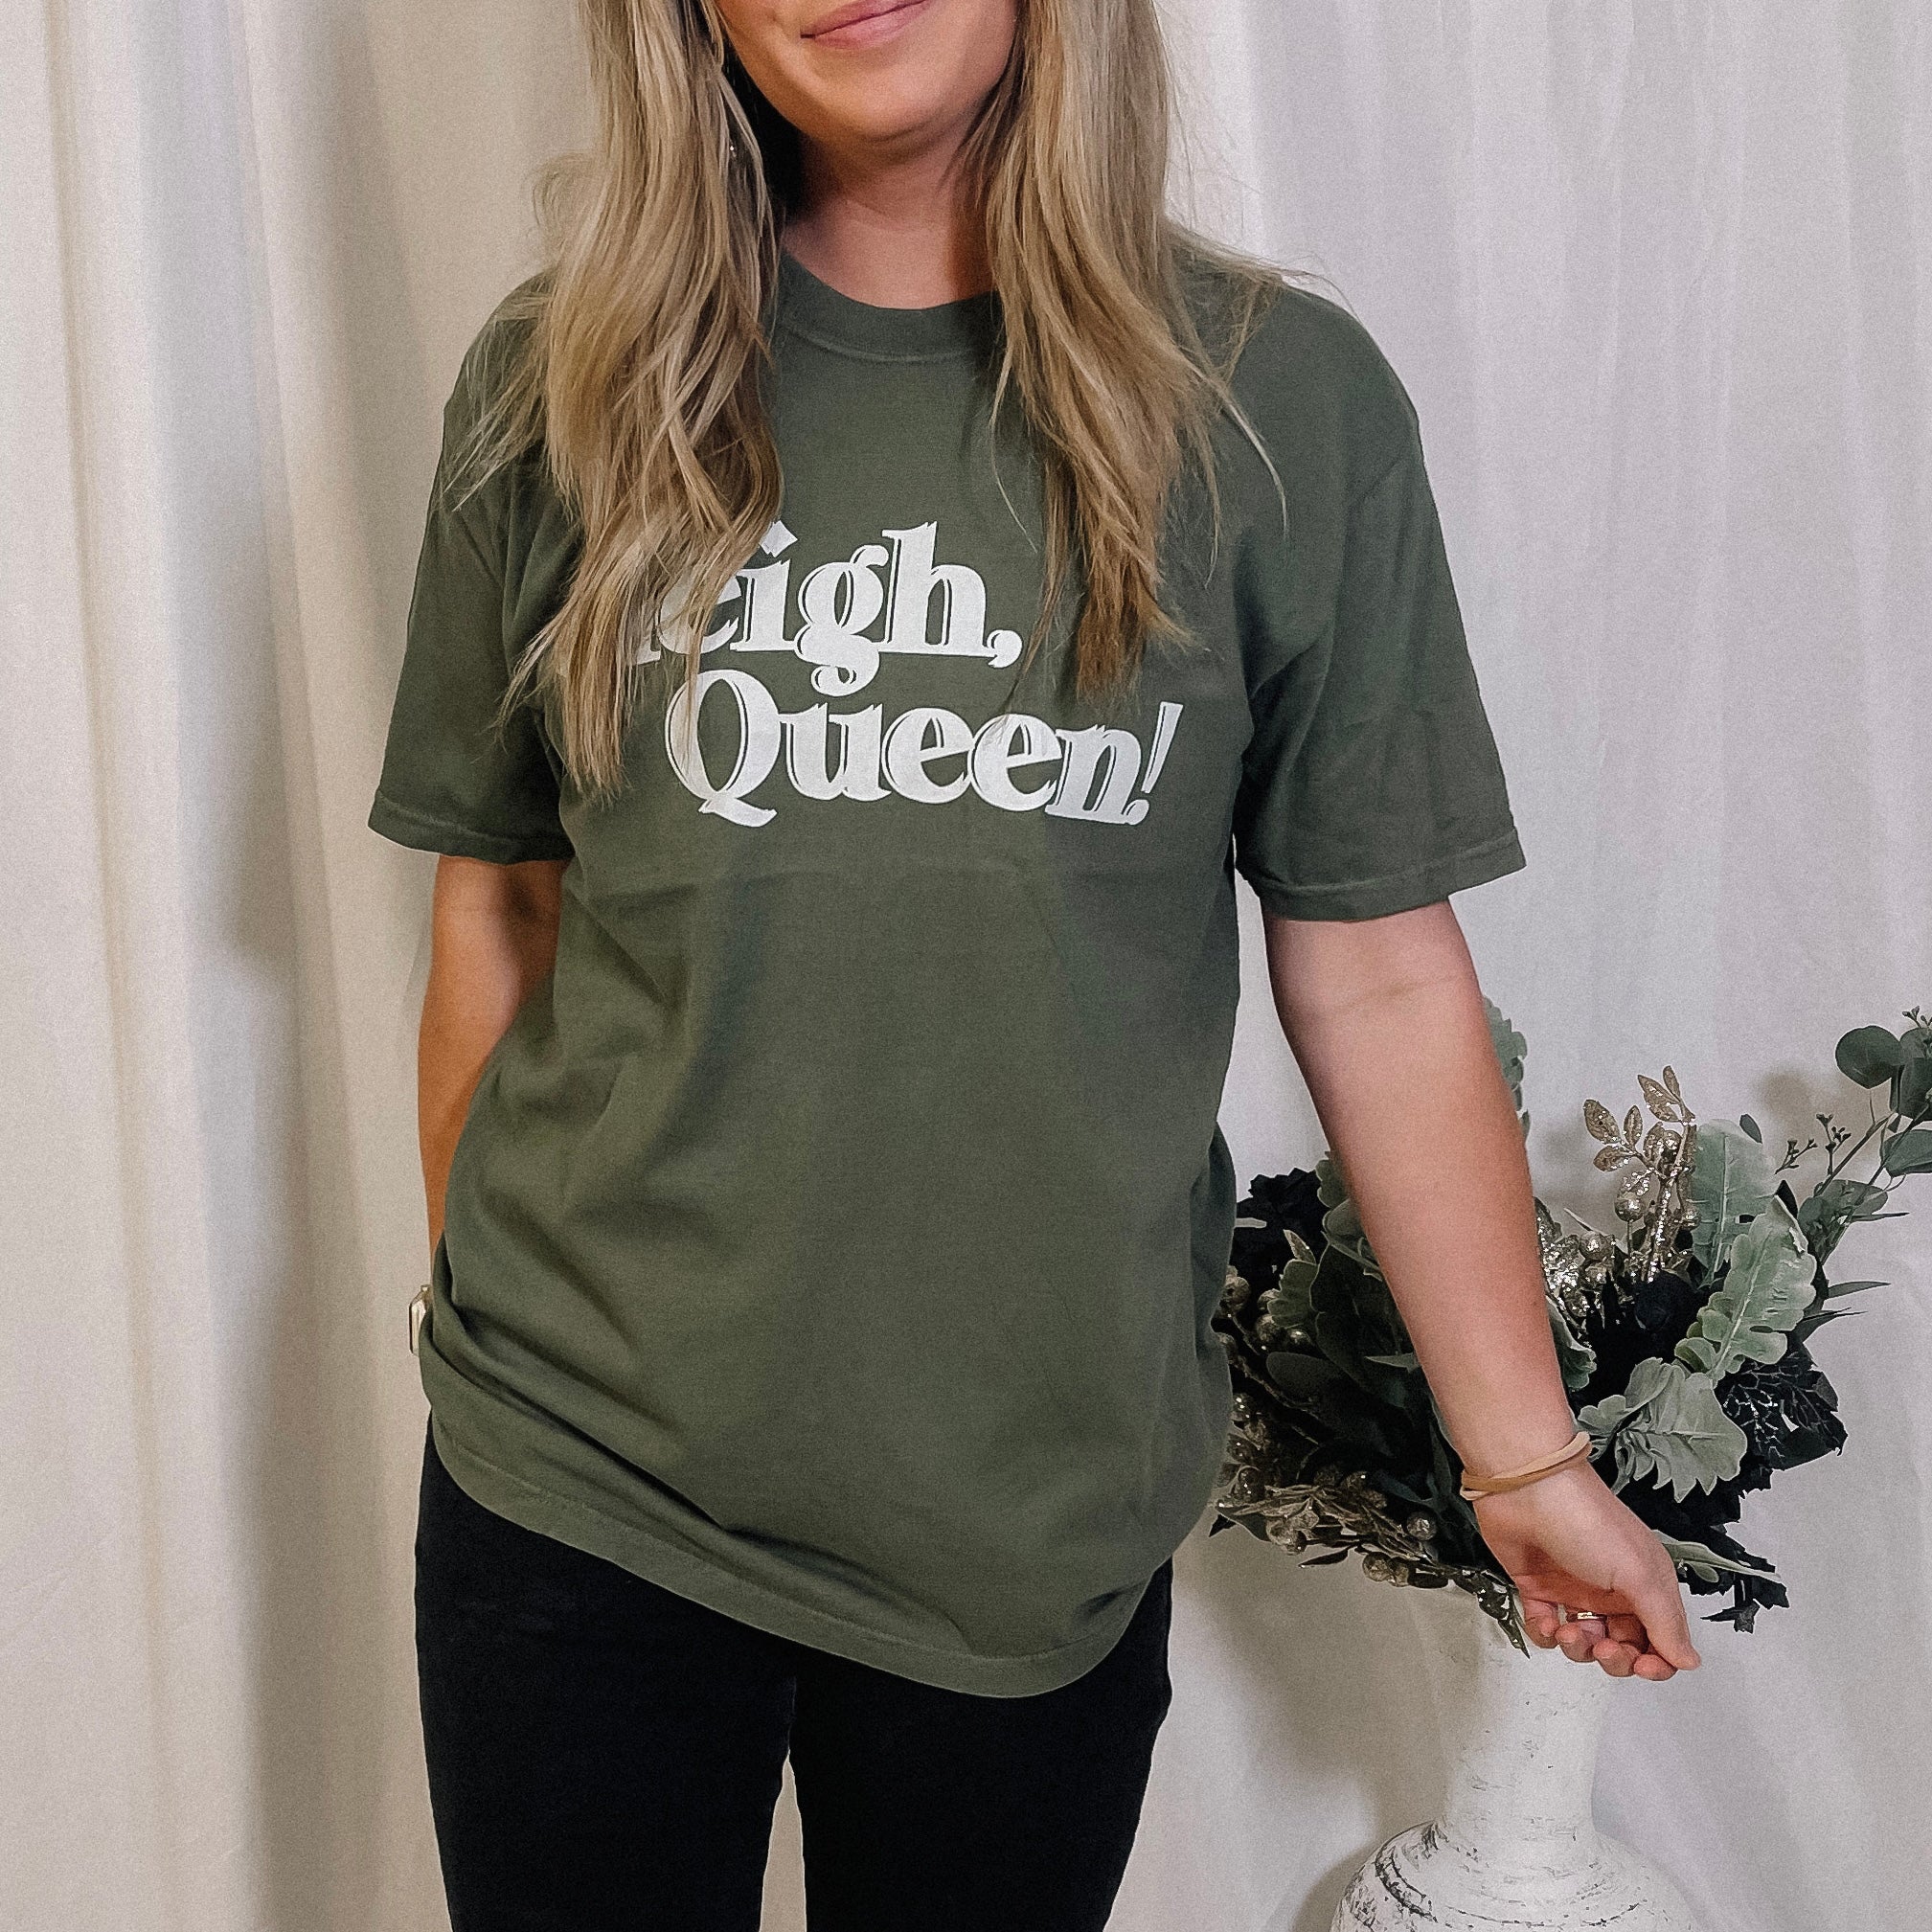 Sleigh Queen Graphic Tee - LAST ONE